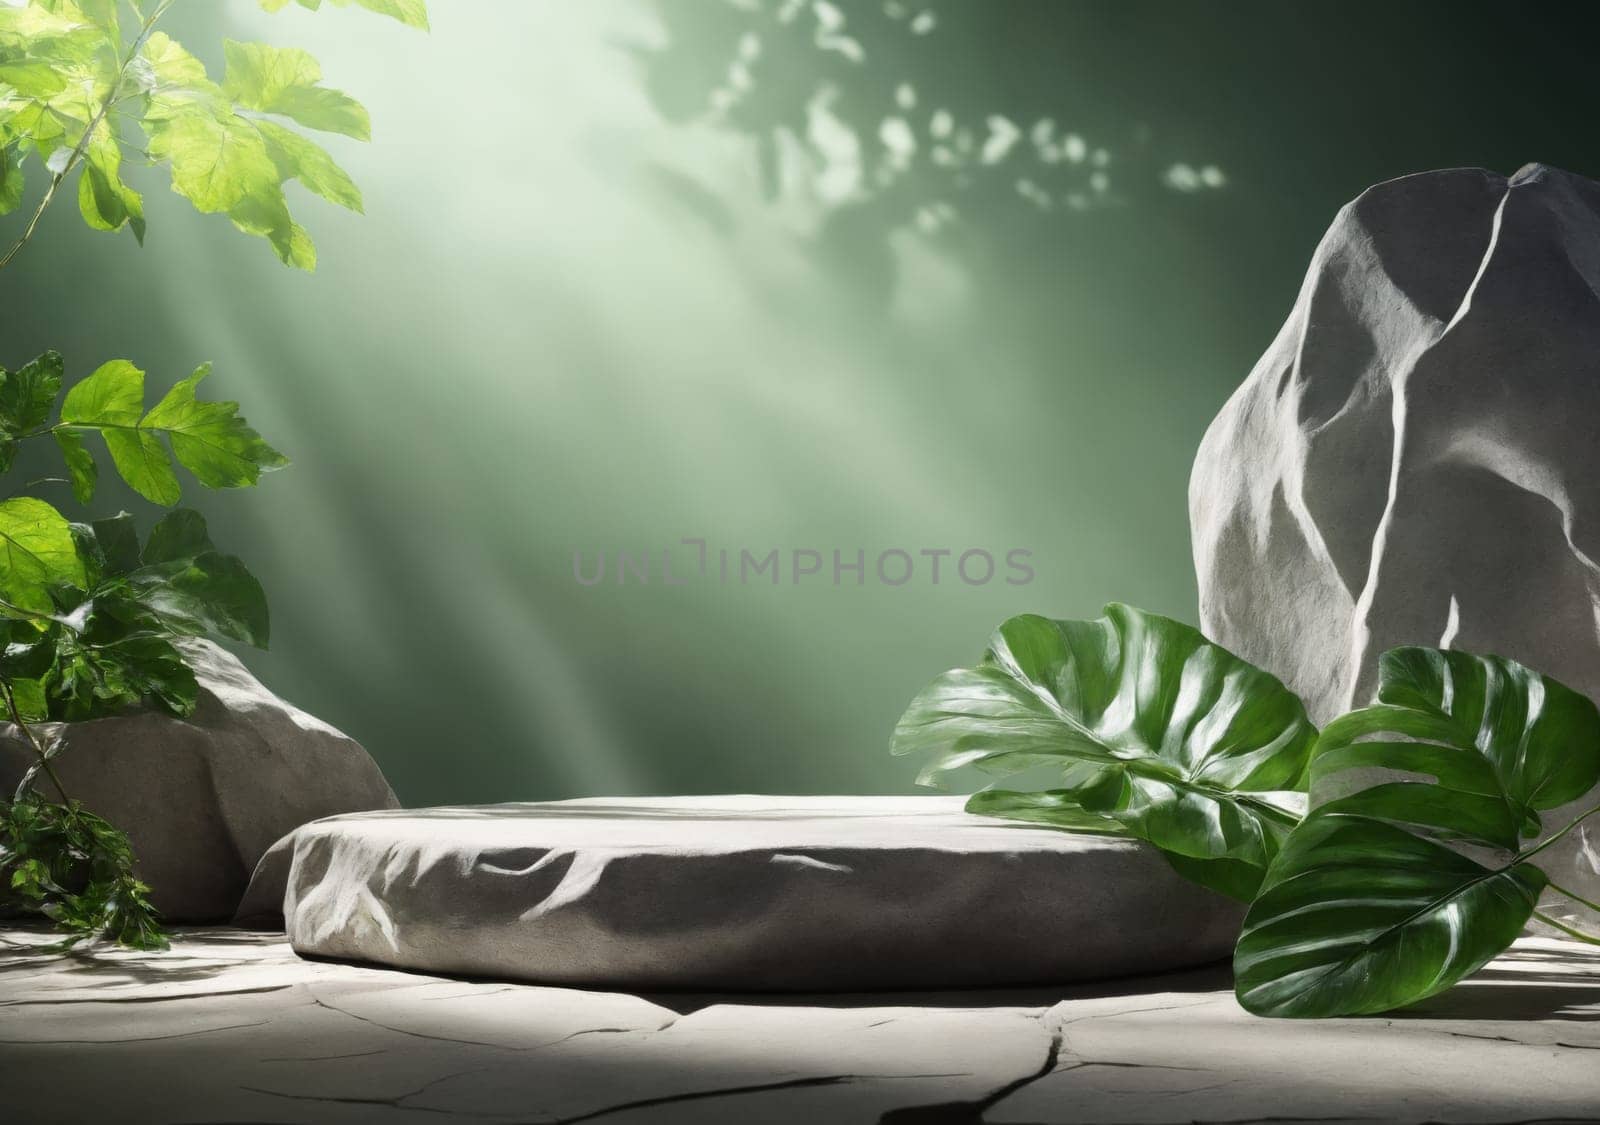 Stone podium scene summer green leaf background. Stone podium mockup with green tropical plants leaves Natural stone concrete podium, tropical forest green leaves. Empty showcase product presentation